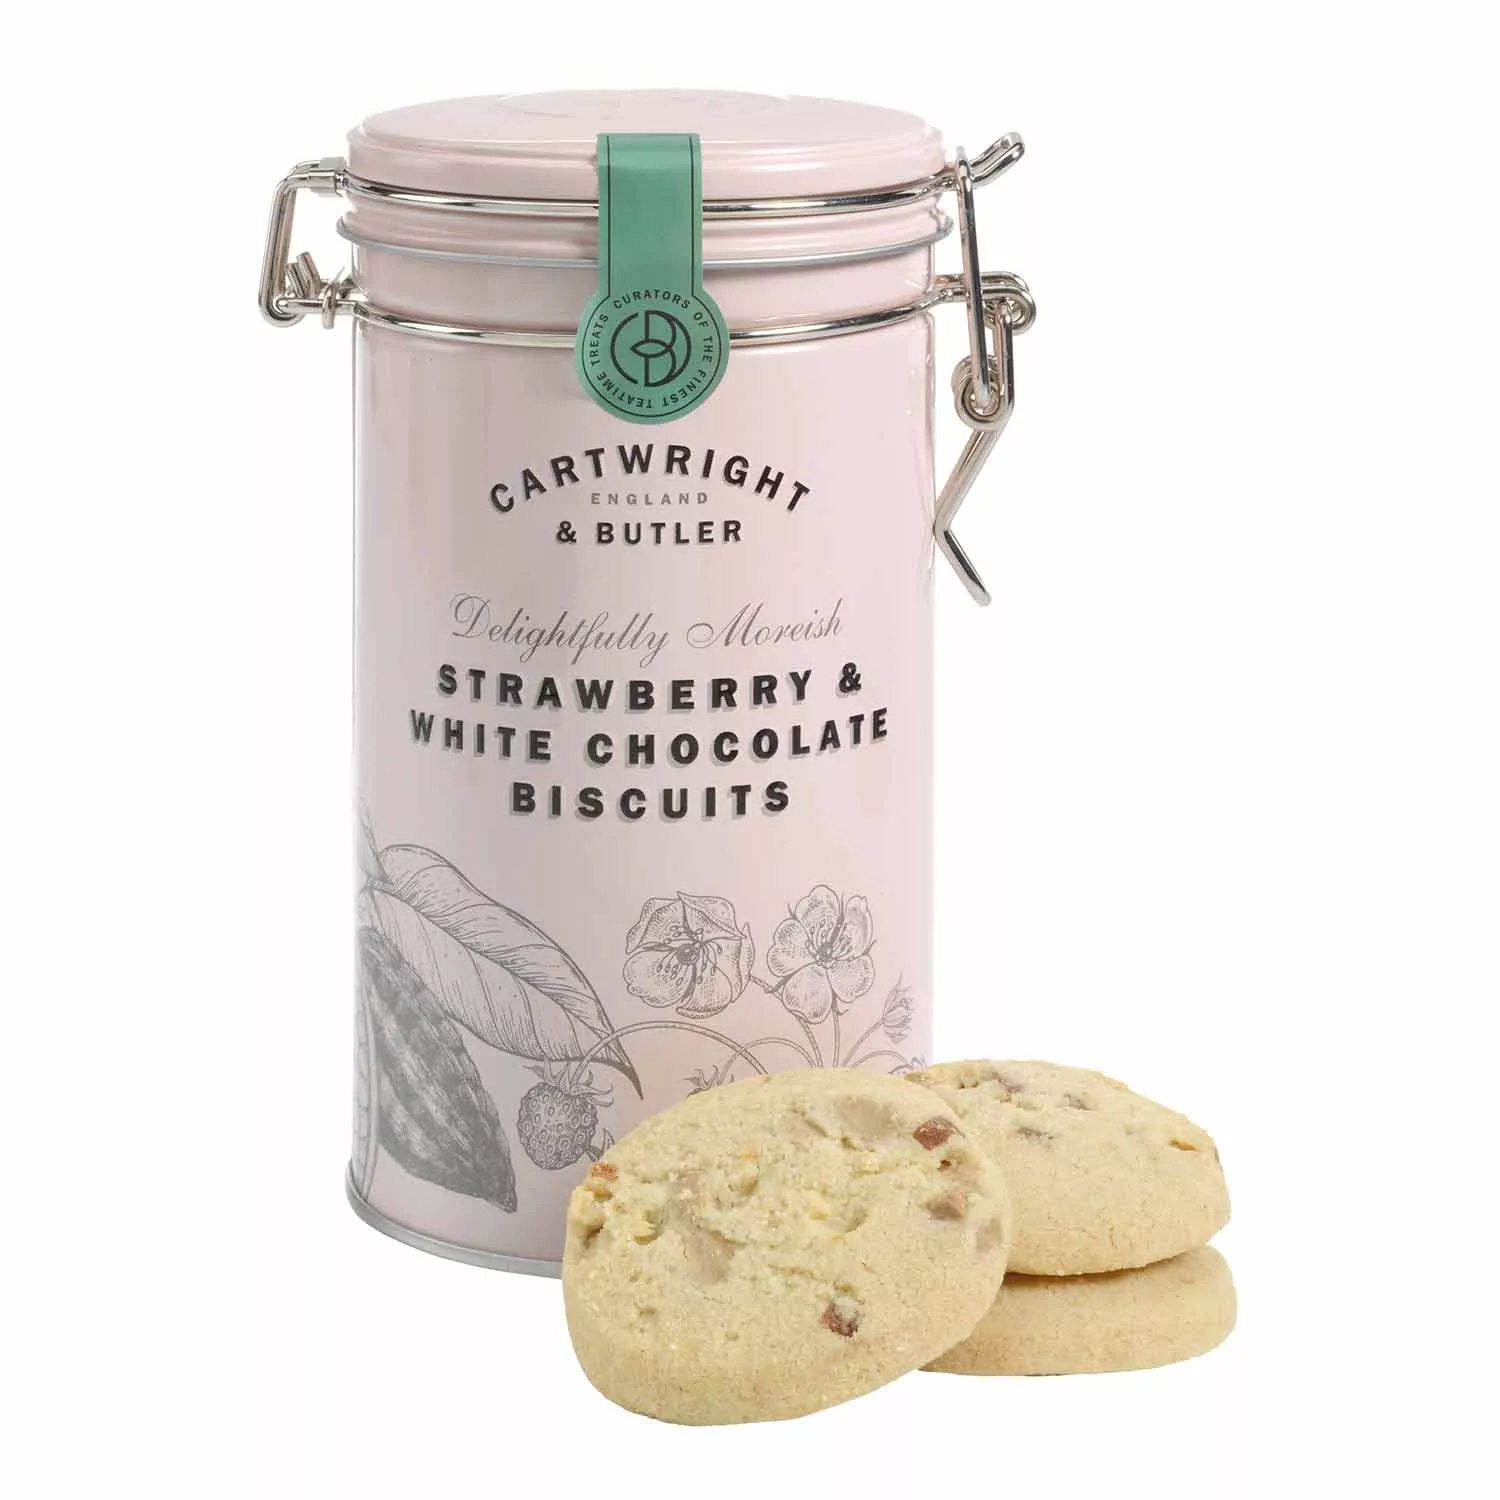 Cartwright & Butler Strawberry & White Chocolate Biscuits | Sur La Table